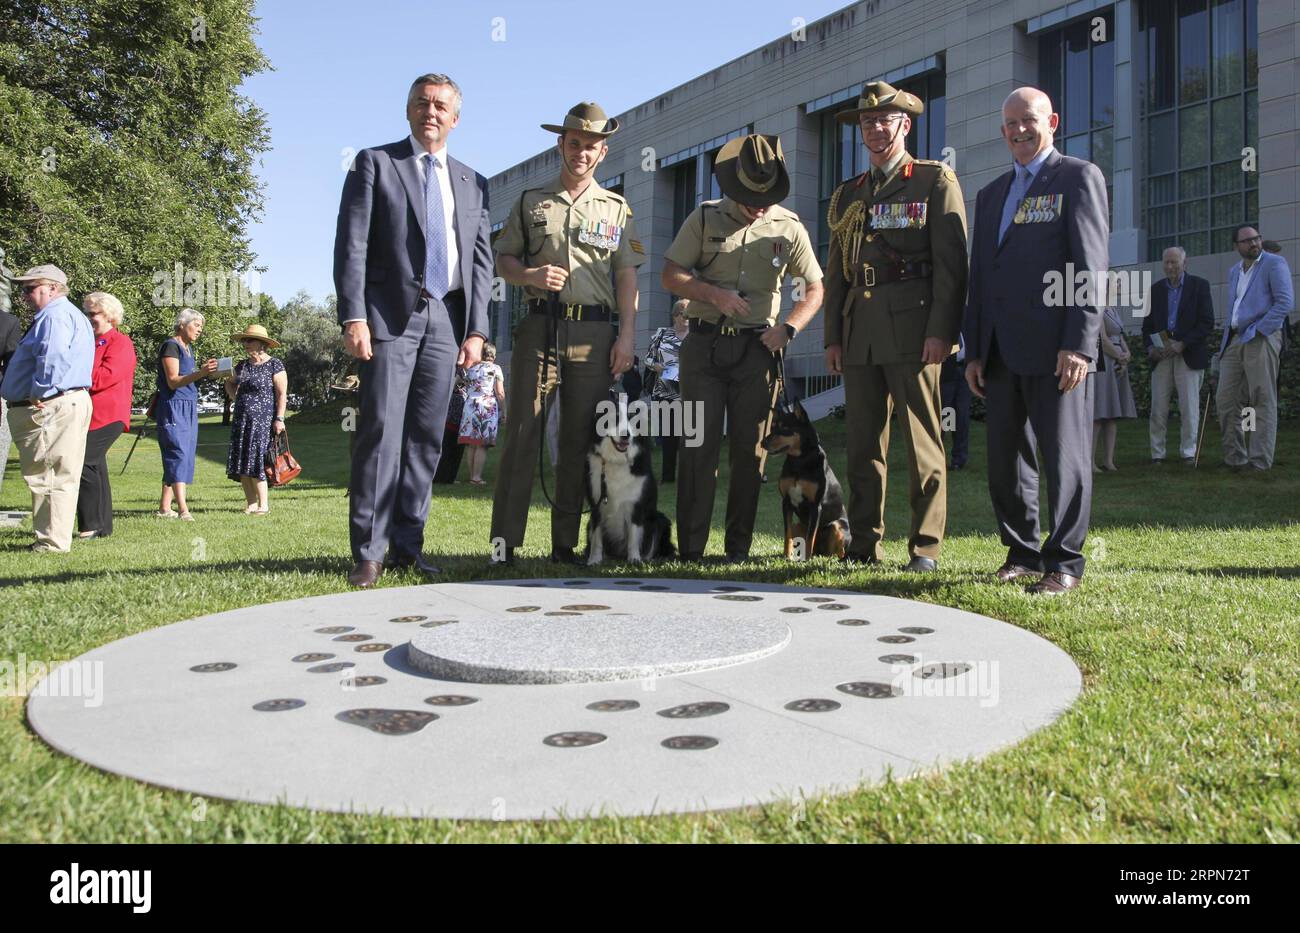 200224 -- CANBERRA, Feb. 24, 2020 Xinhua -- Darren Chester1st L, the Australian Minister for Veterans and Defence Personnel, poses for photos with military officers and their military working dogs in front of a new memorial dedicated to military working dogs and their handlers at Australian War Memorial AWM in Canberra, Australia, Feb. 24, 2020. AWM on Monday unveiled a new memorial dedicated to military working dogs and their handlers. Monday is the National Day for War Animals in Australia. Photo by Liu Changchang/Xinhua AUSTRALIA-CANBERRA-MEMORIAL-MILITARY WORKING DOGS PUBLICATIONxNOTxINxCH Stock Photo